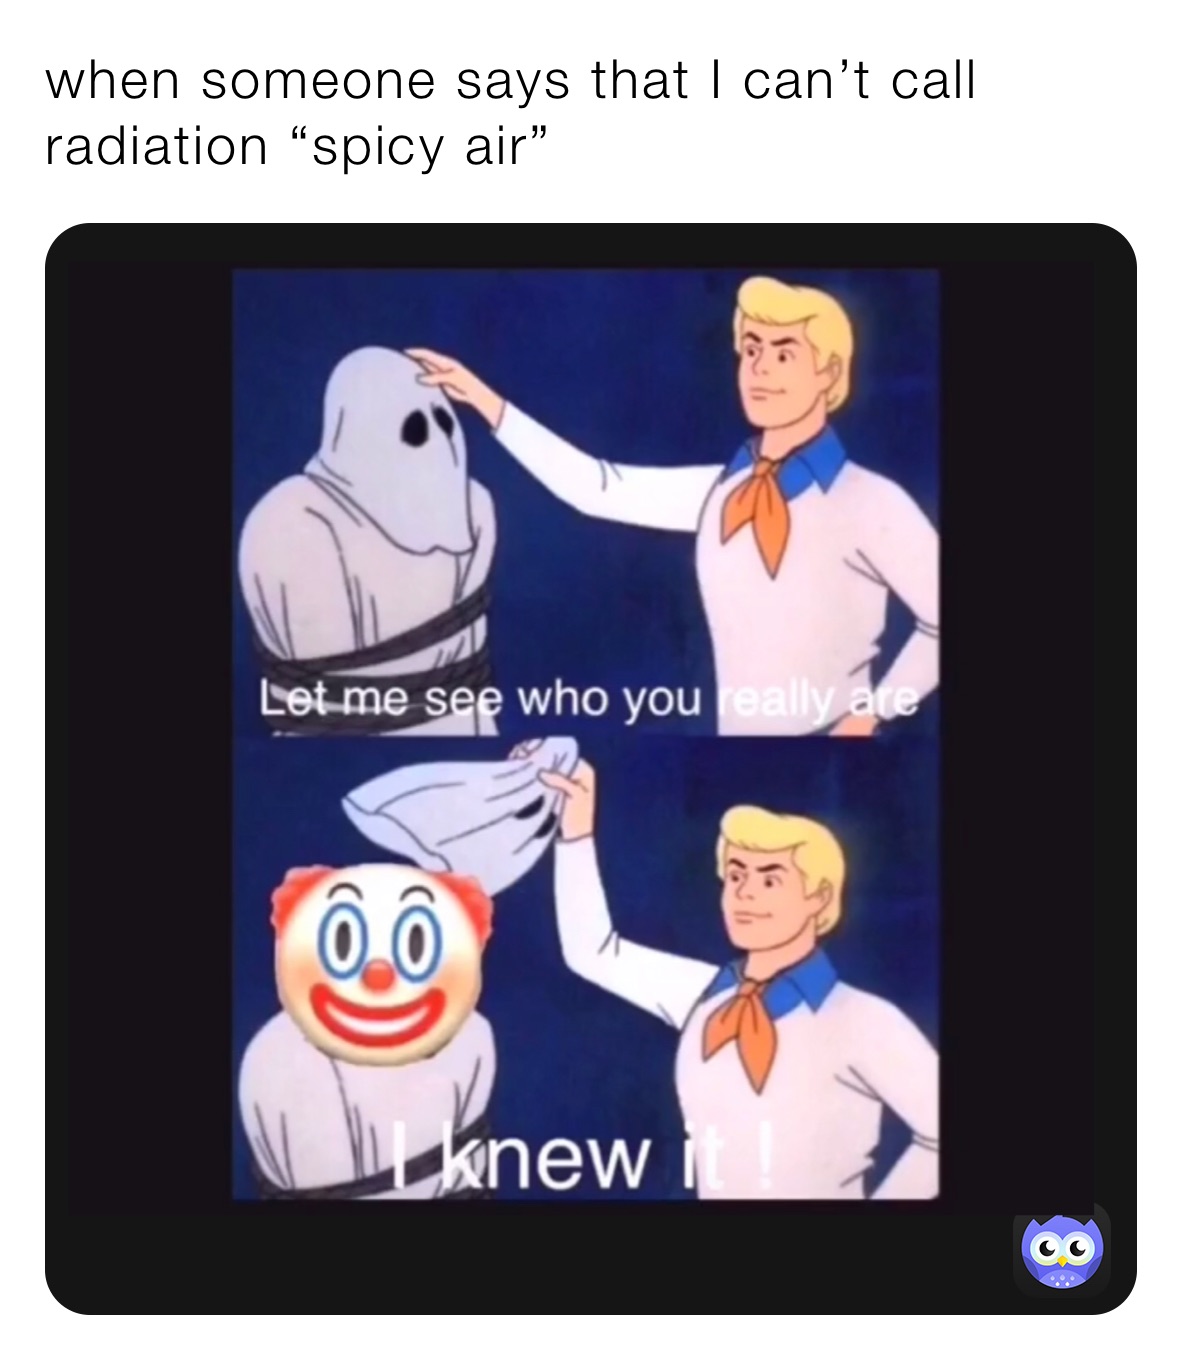 when someone says that I can’t call radiation “spicy air”